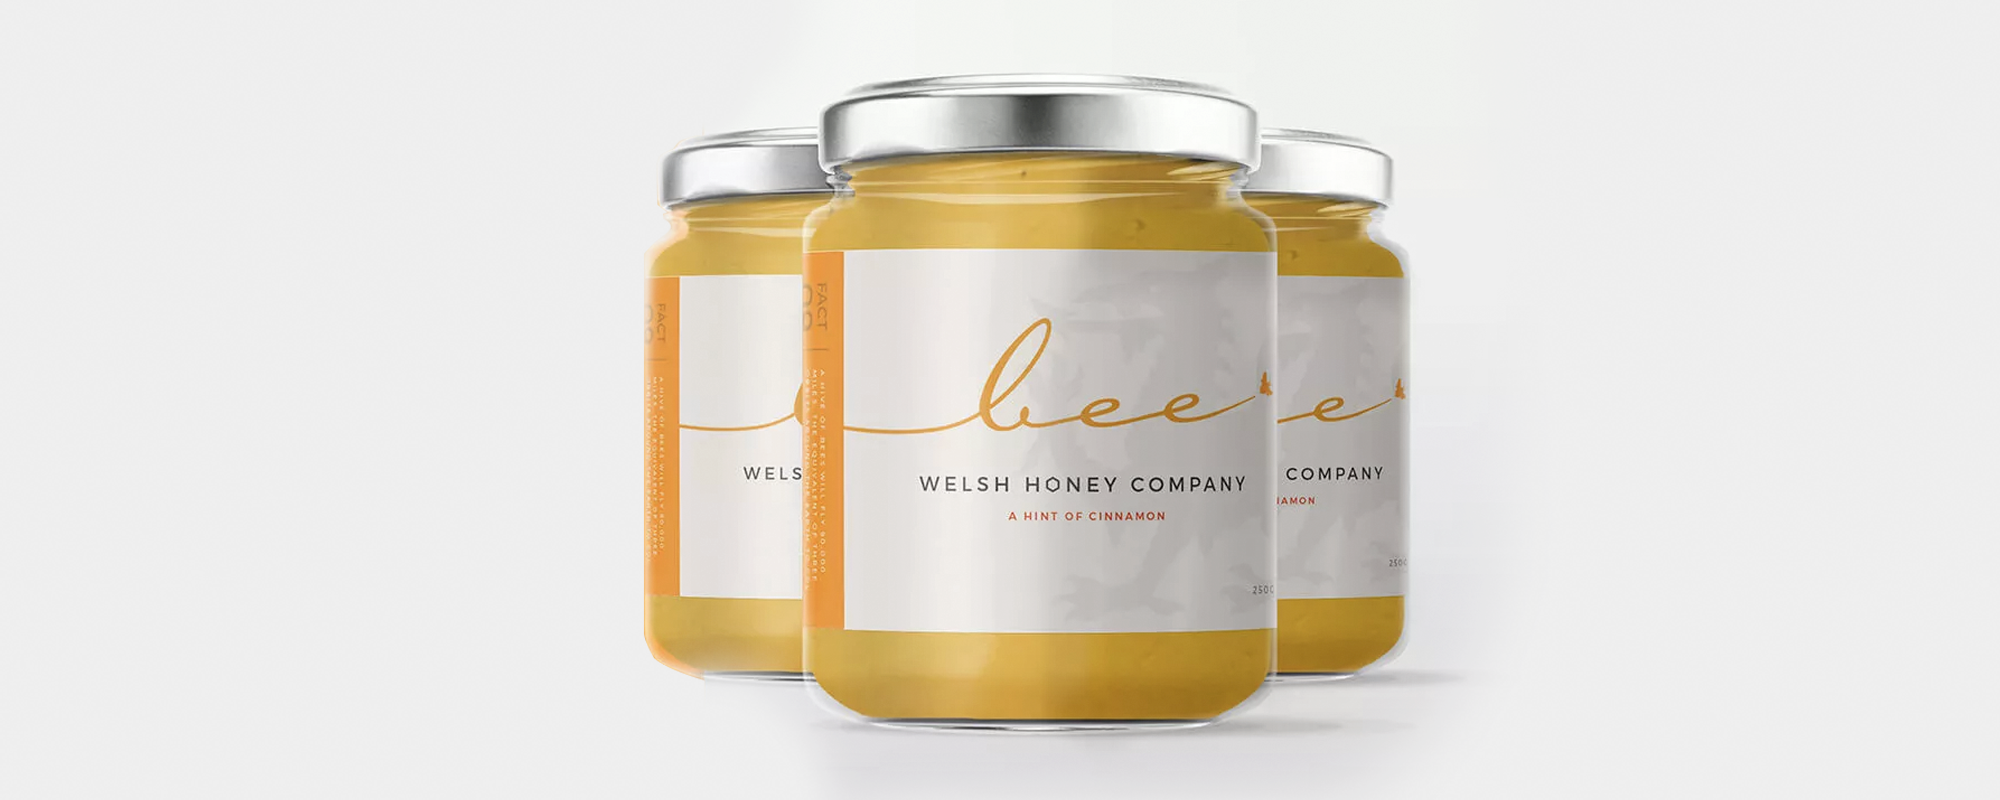 Food label branding for Bee Welsh Honey Company, shown on three jars of honey in a triangle